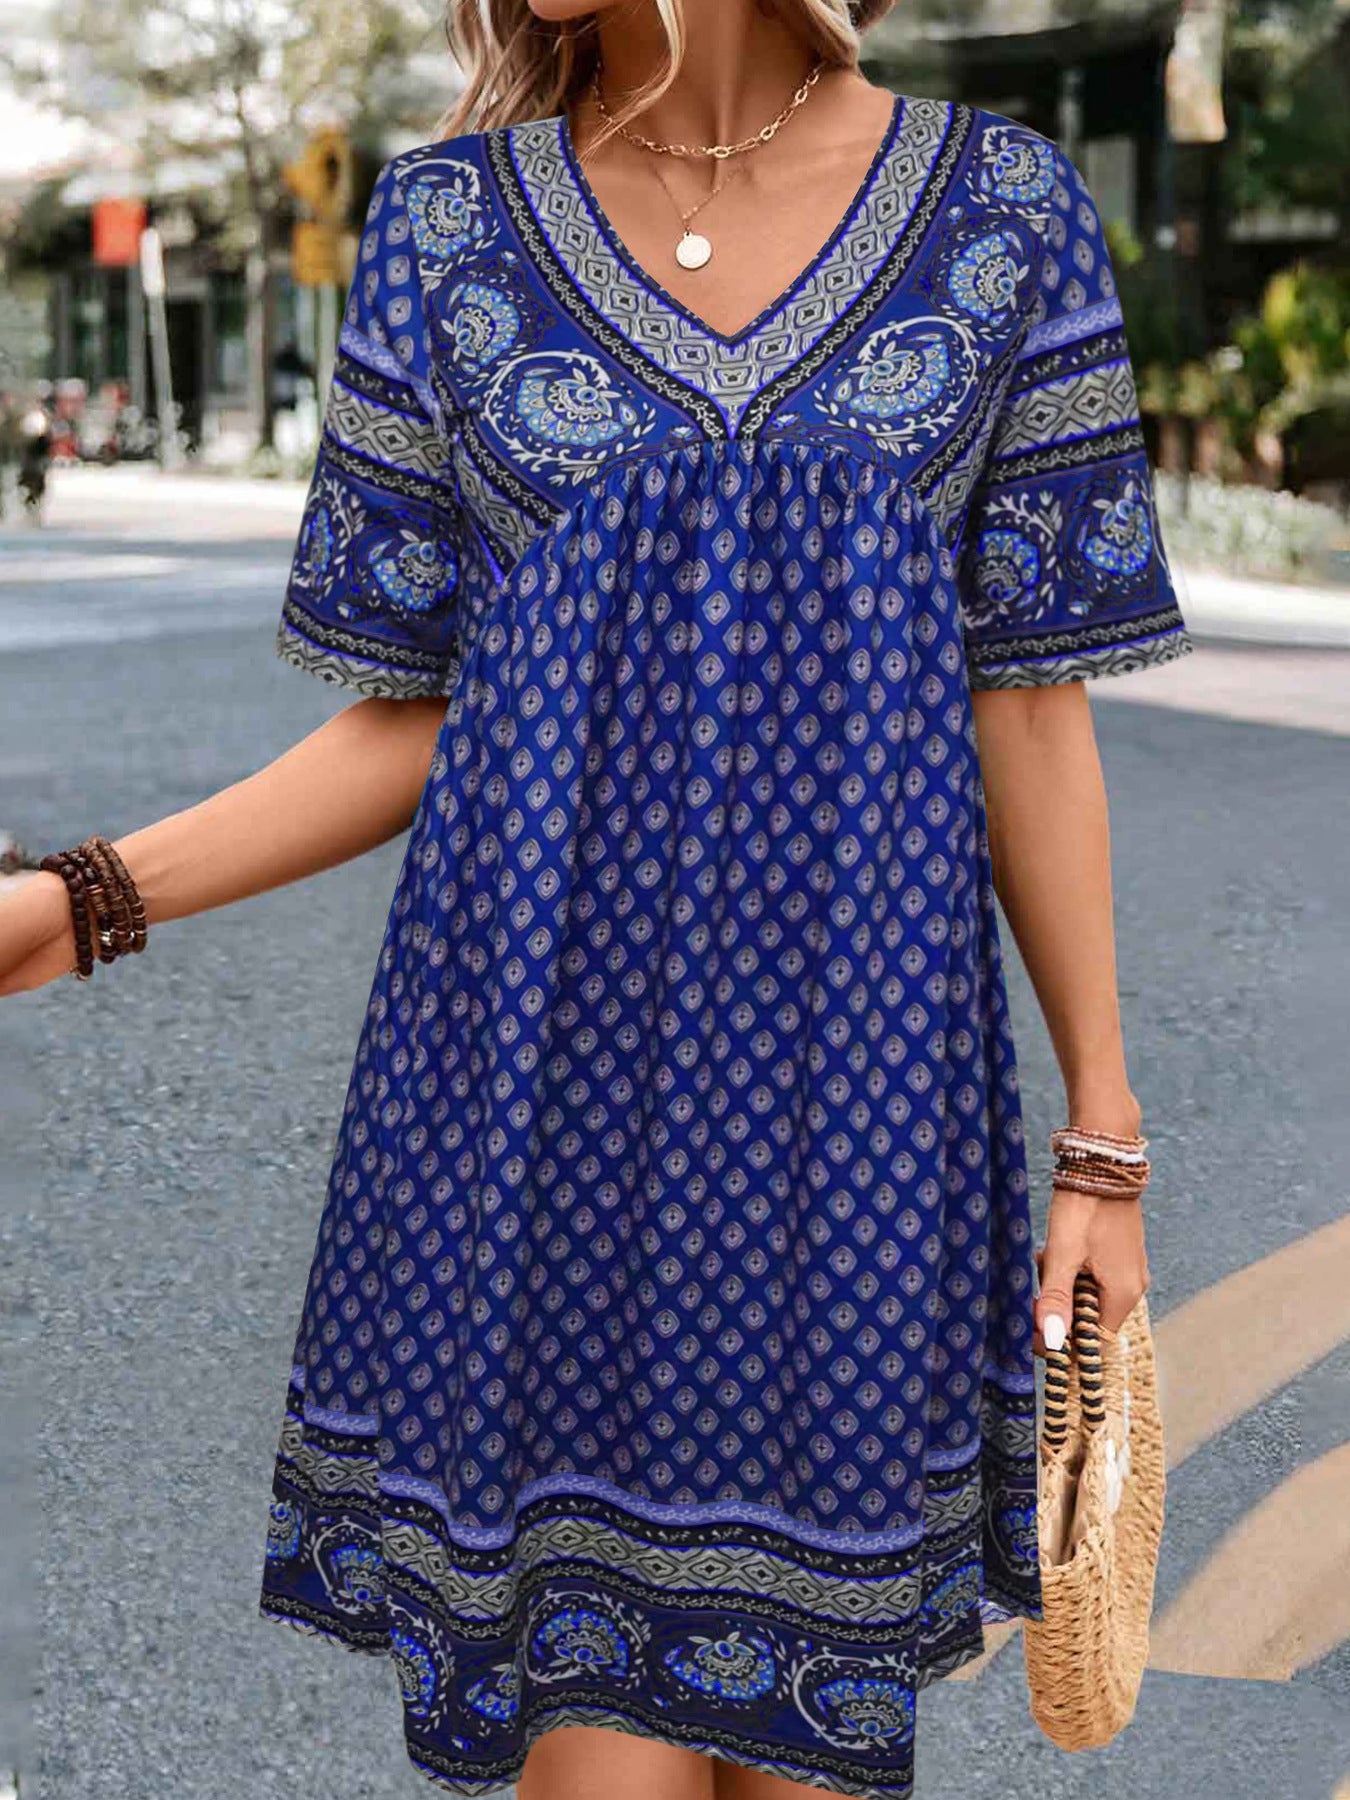 Women's Short-sleeved Printed Ethnic Fashion Casual Dress Dresses